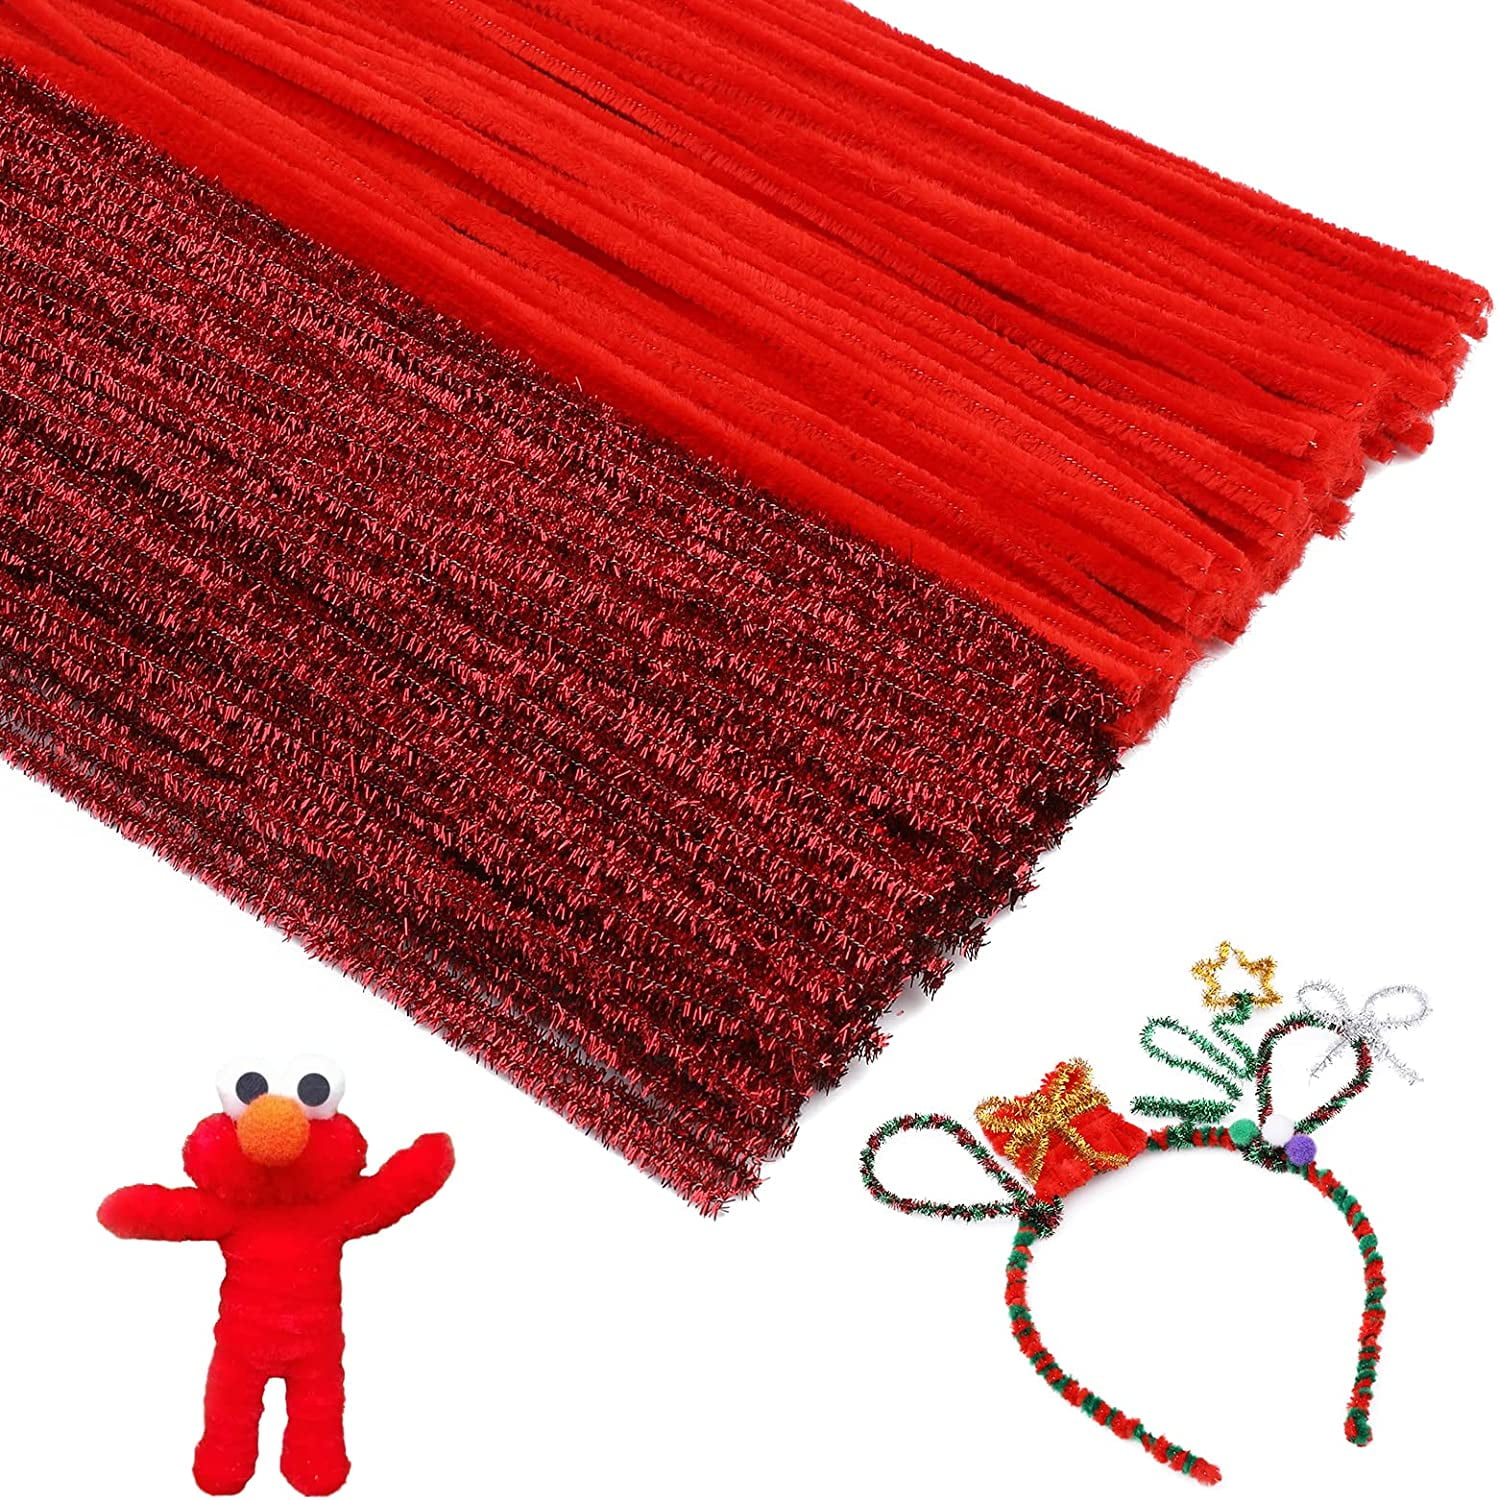 Red, Black, and White Pipe Cleaners, 12'' x 6 mm Diameter, Red / Burgundy, Craft Supplies from Factory Direct Craft